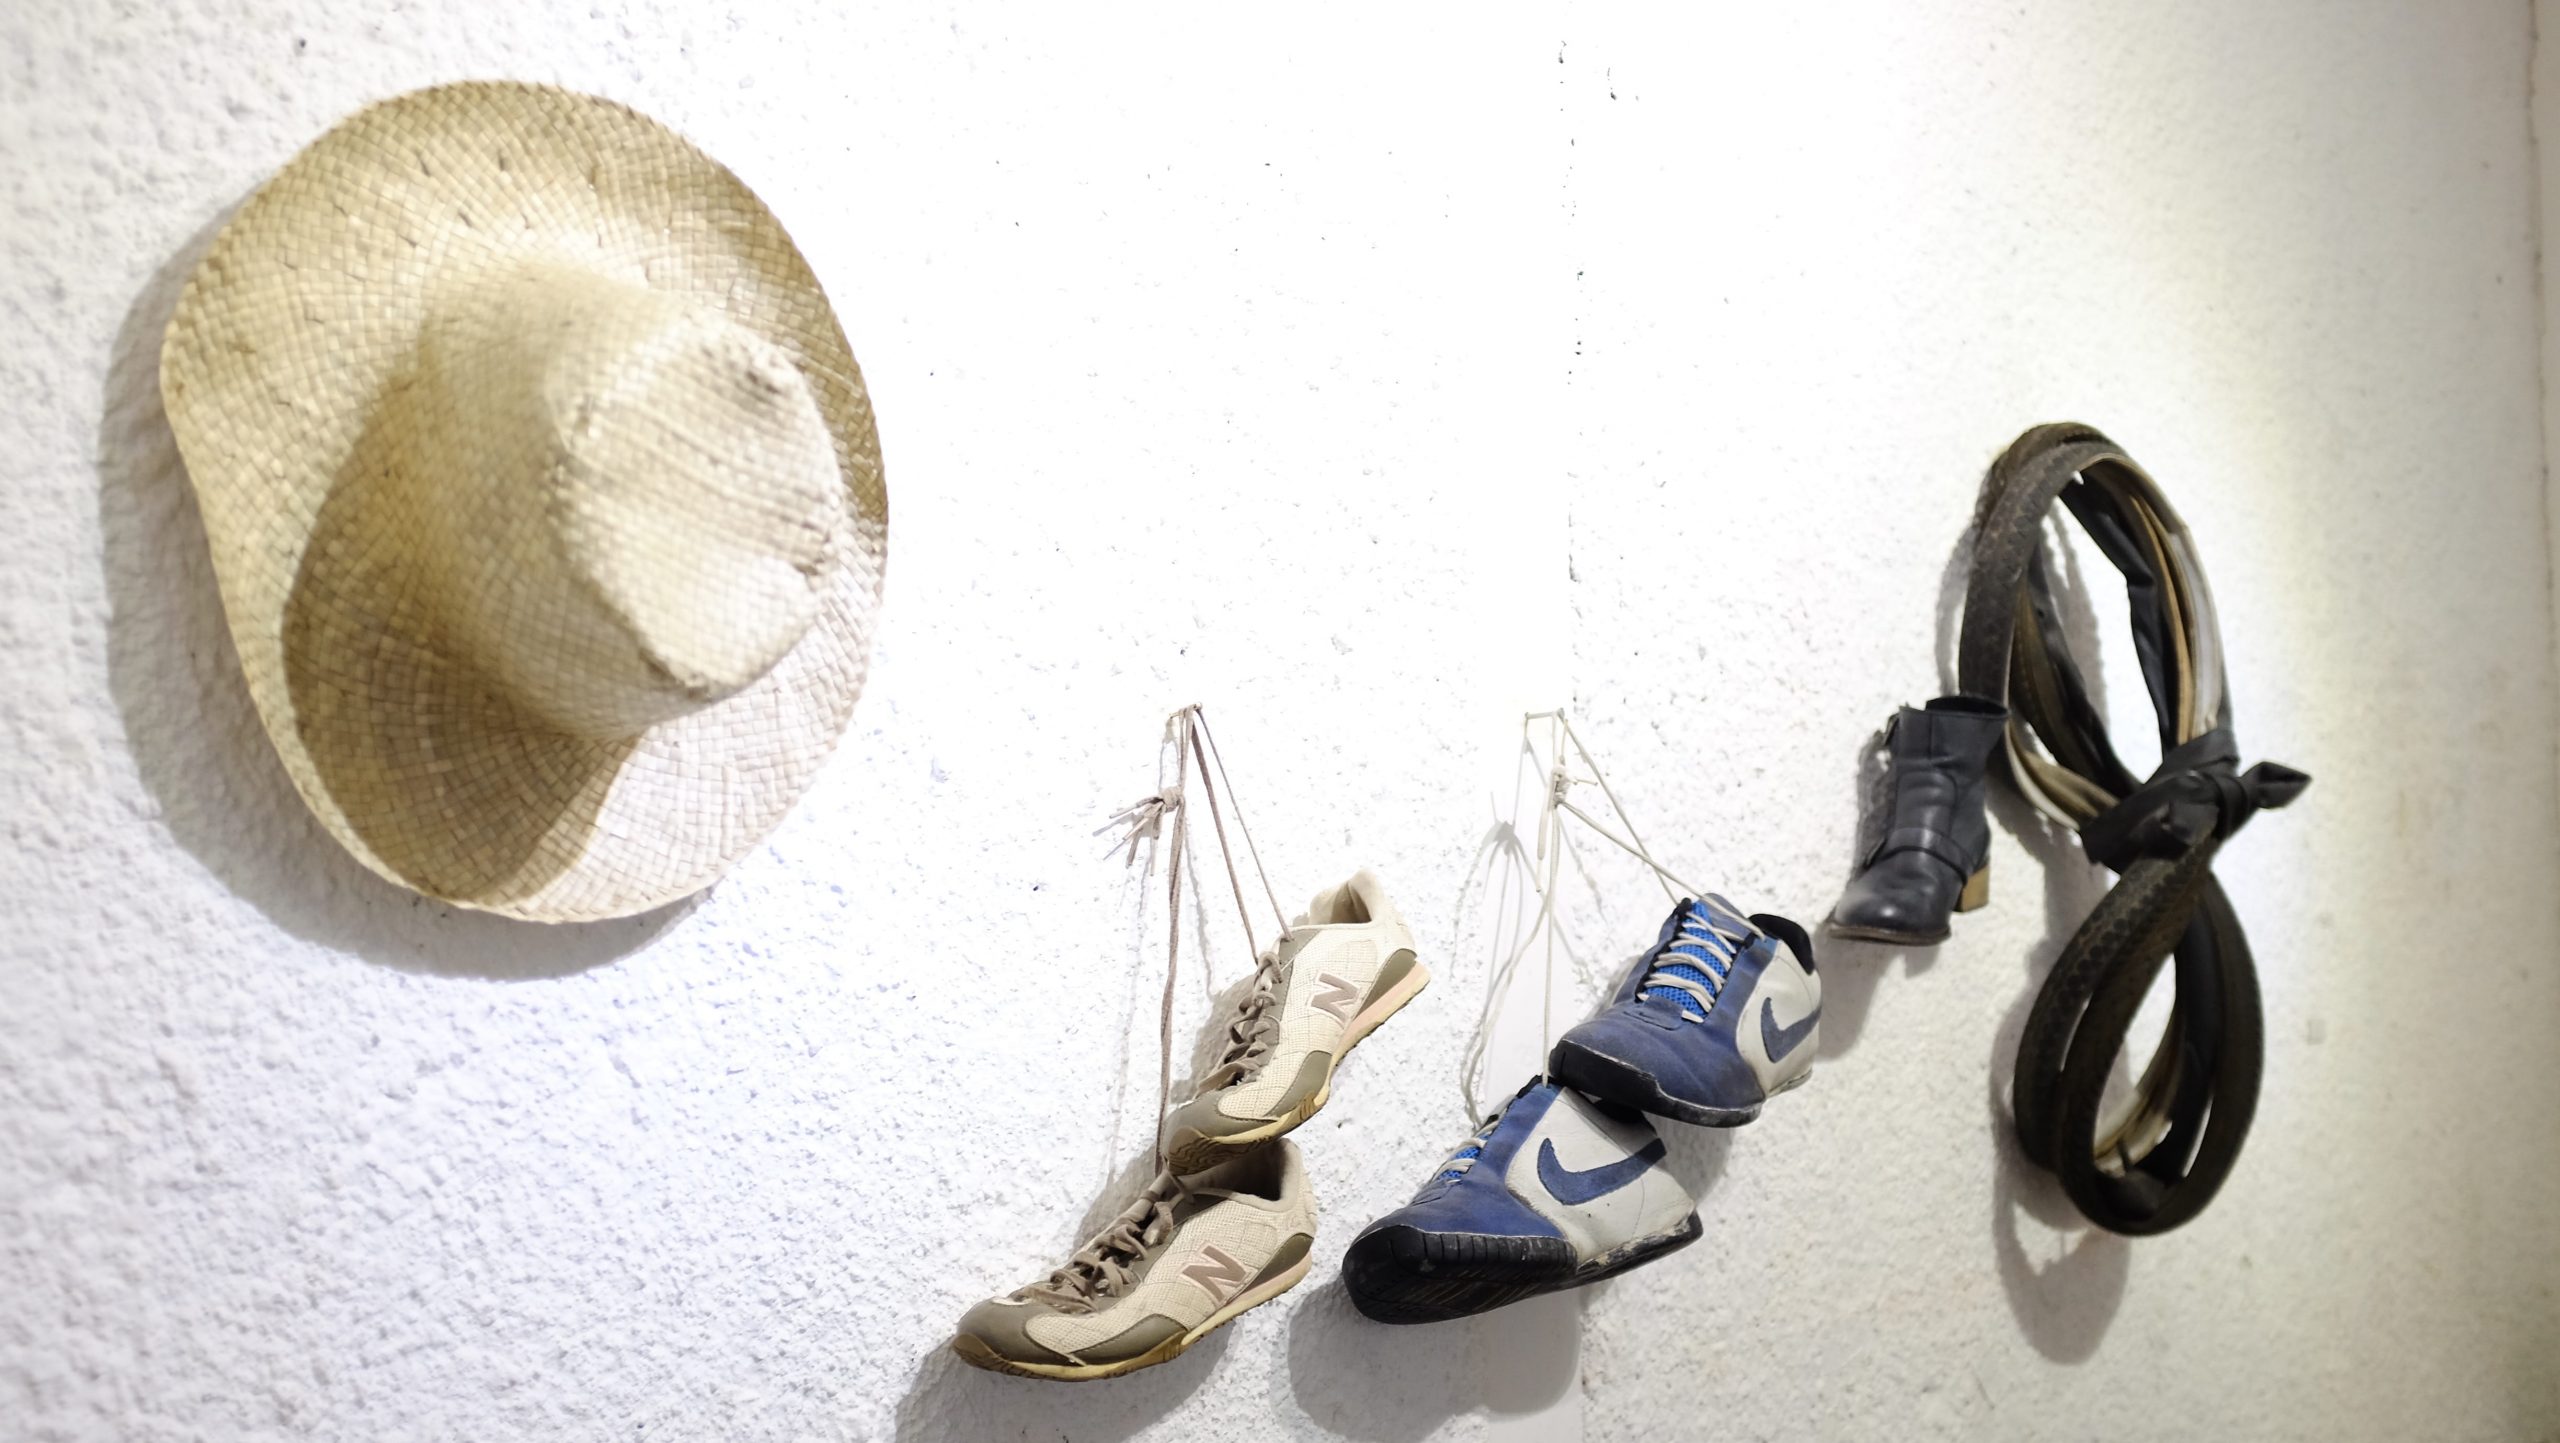 Indonesia, suar art space, white wall, sneakers, hanging, hat